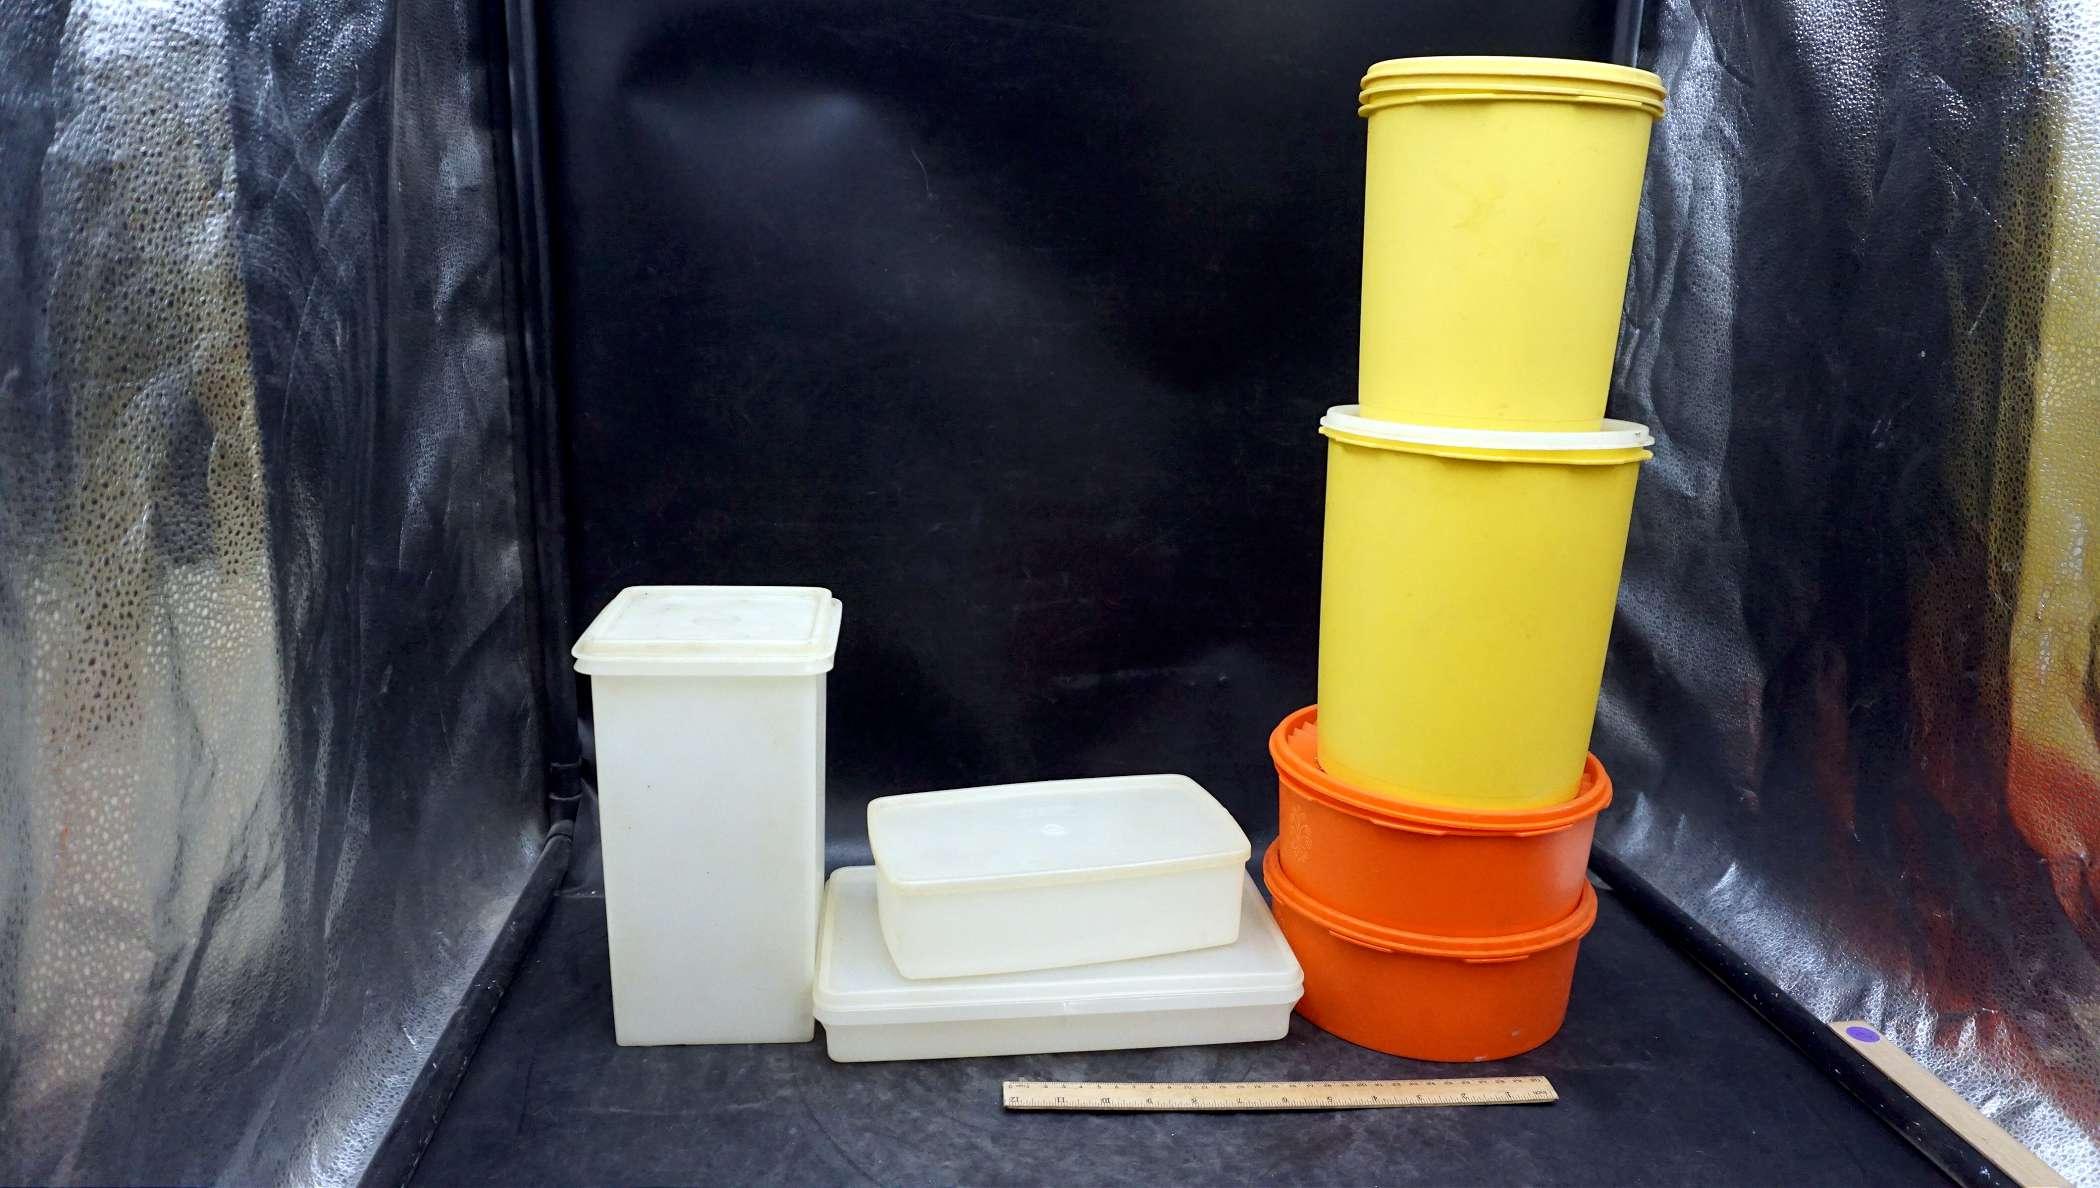 Assorted Tupperware Containers